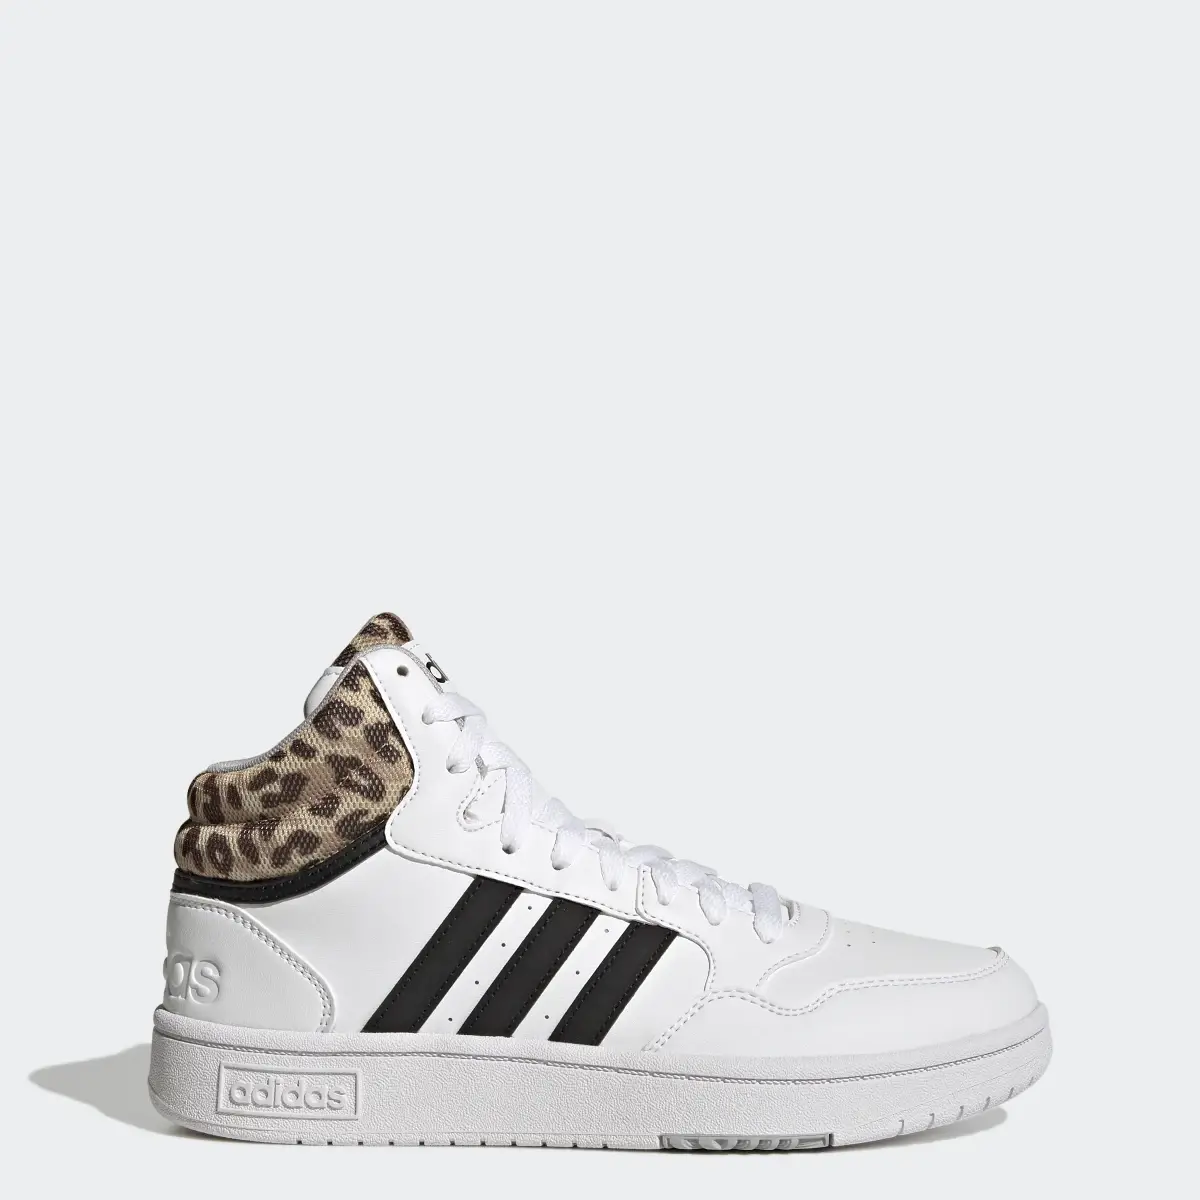 Adidas Hoops 3.0 Lifestyle Basketball Mid Classic Schuh. 1